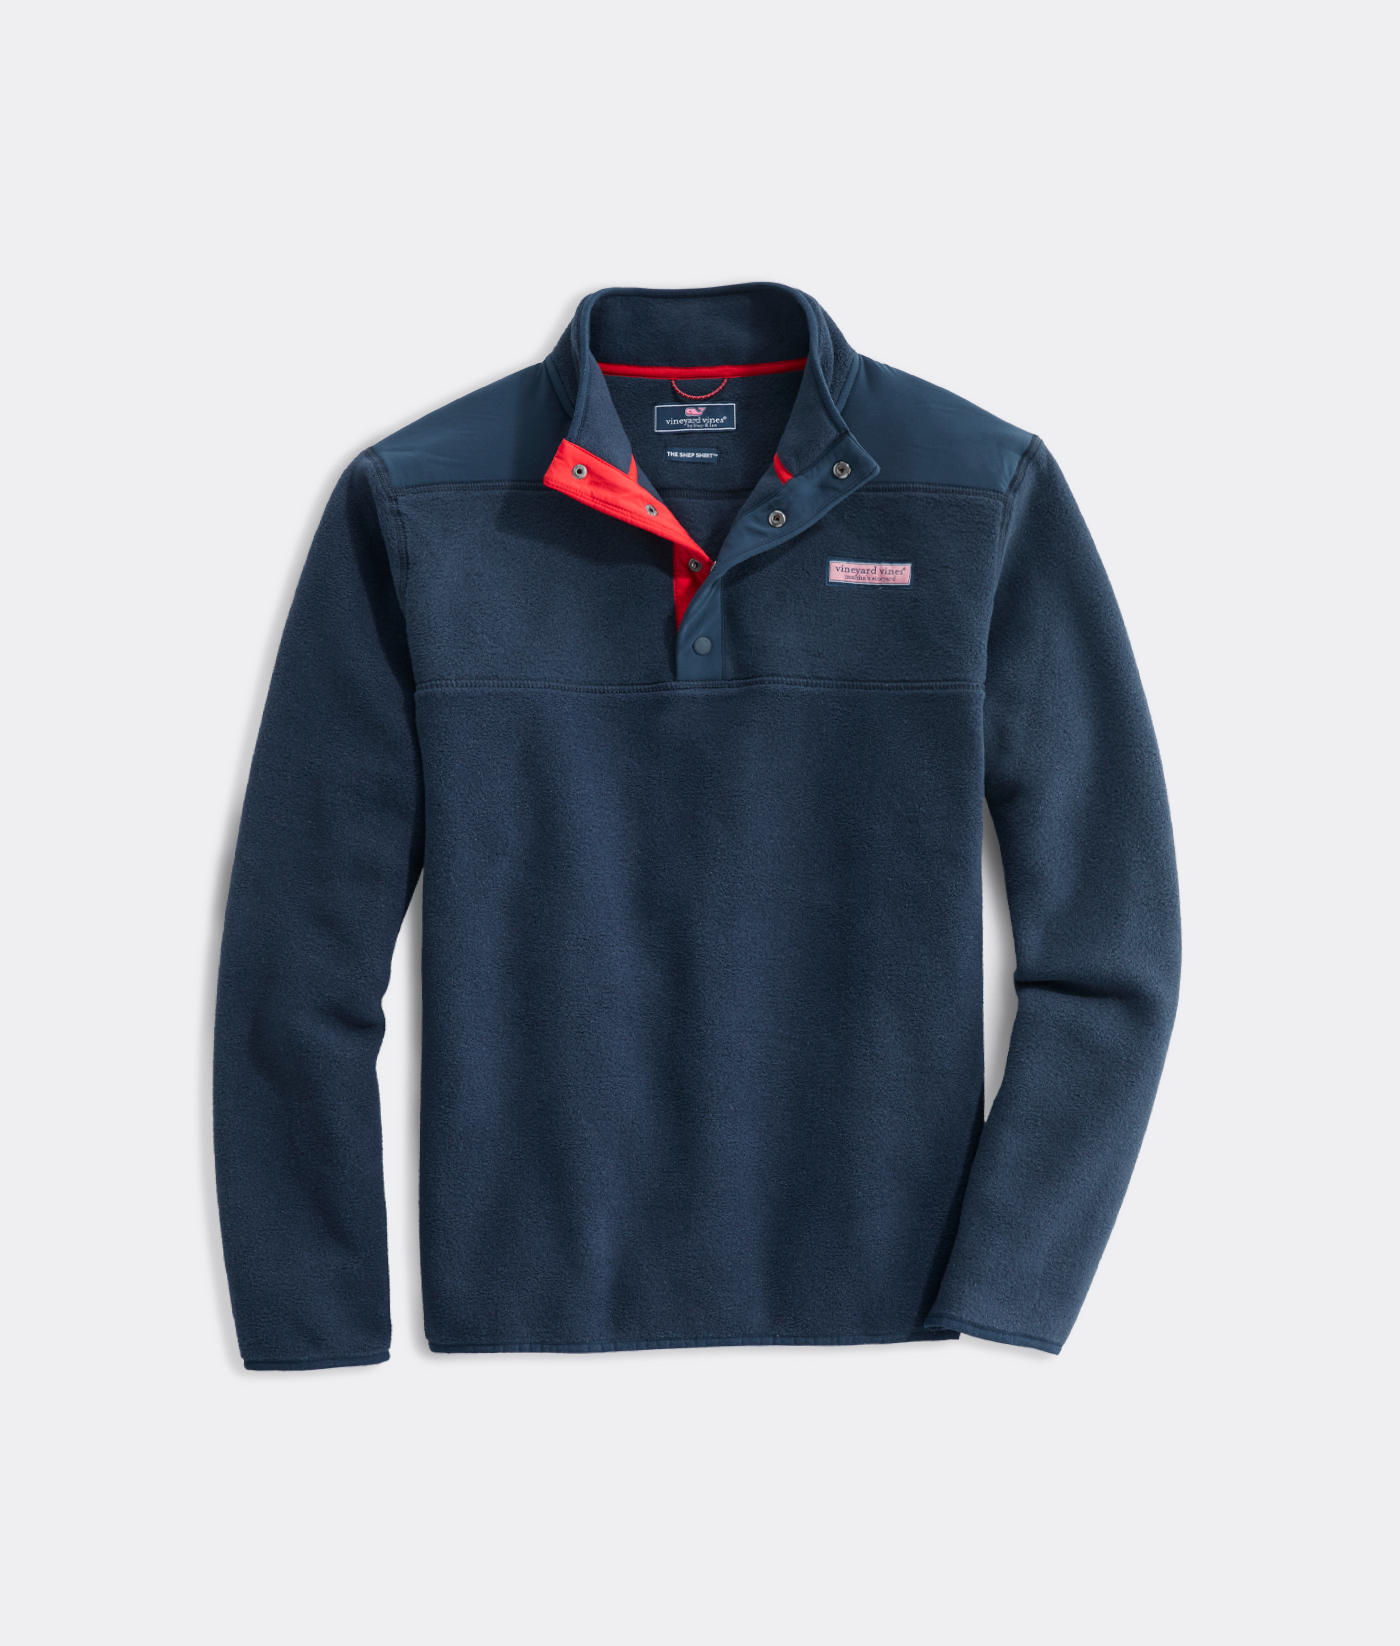 Cheap Vineyard Vines MLB Gear, Discounted Vineyard Vines MLB Store,  Clearance Vineyard Vines Originals and More